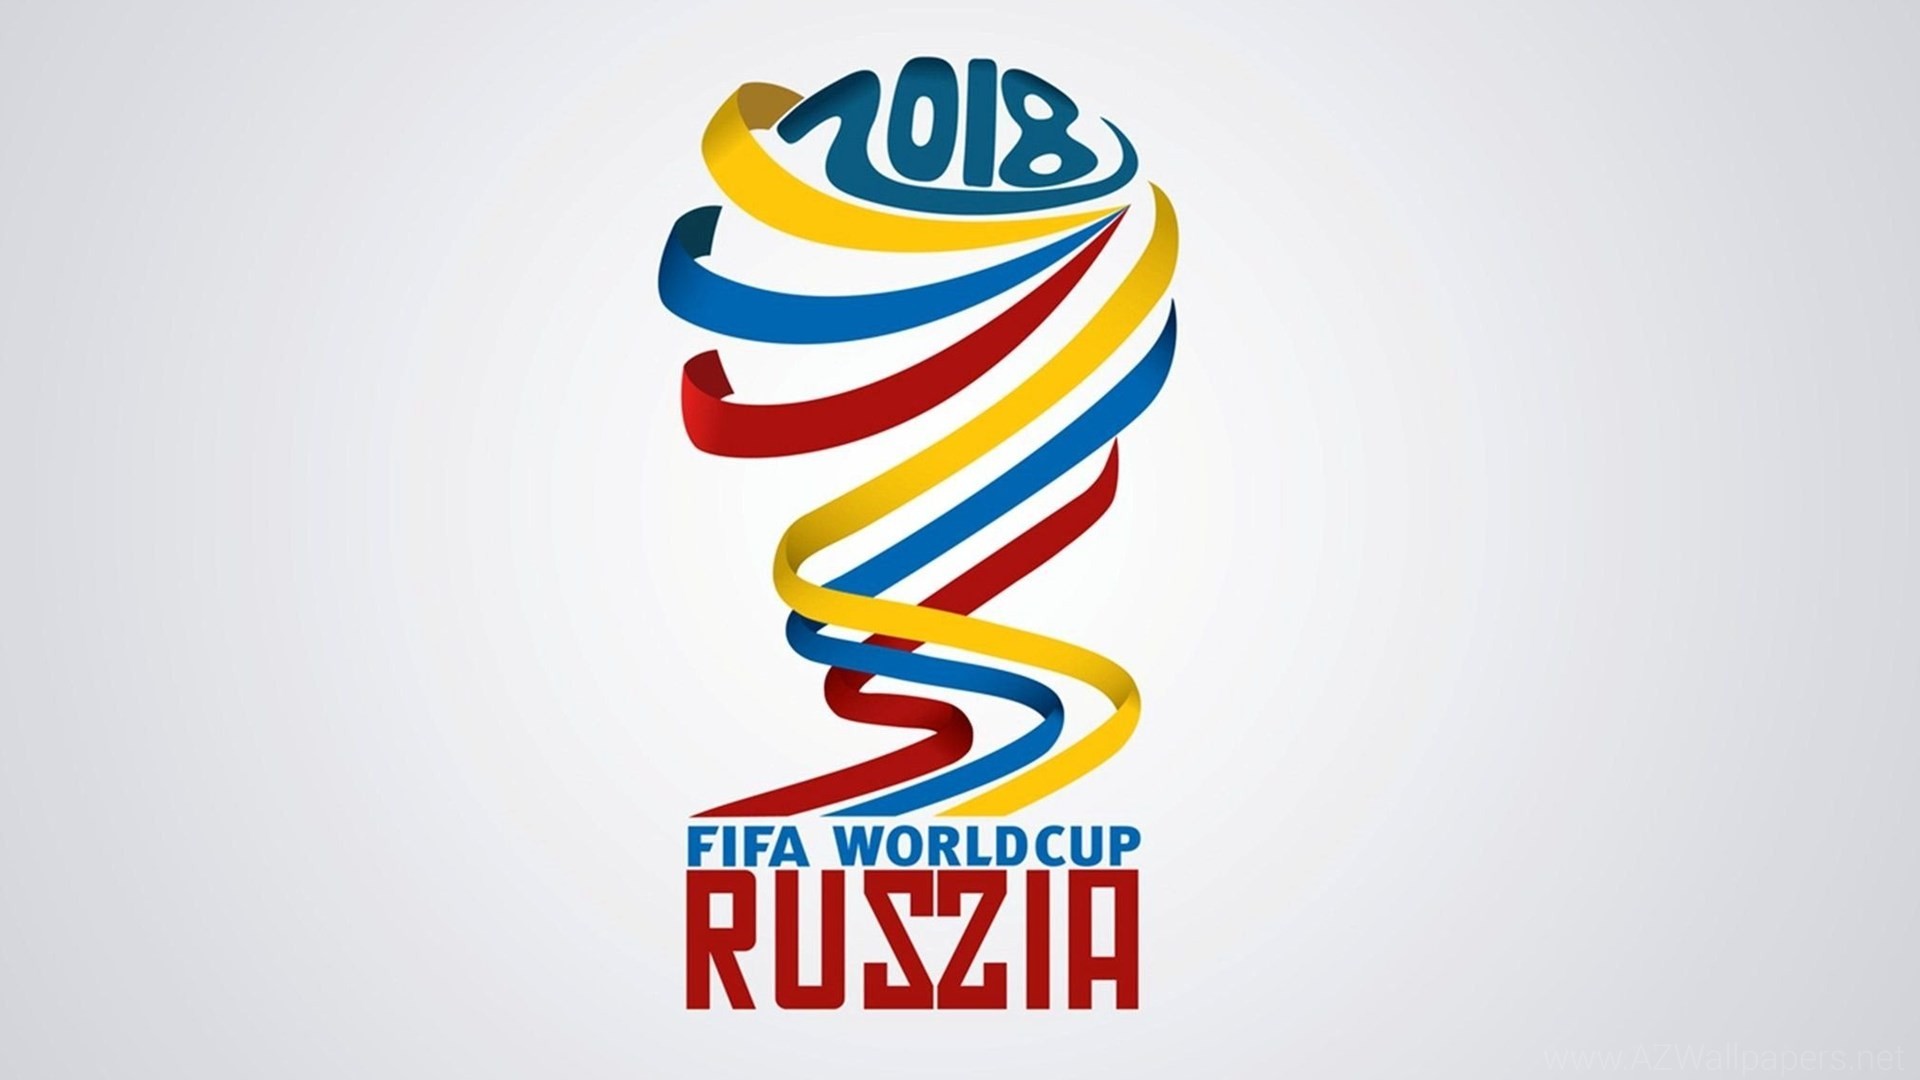 2018 World Cup HD Wallpaper With Resolution 1920X1080